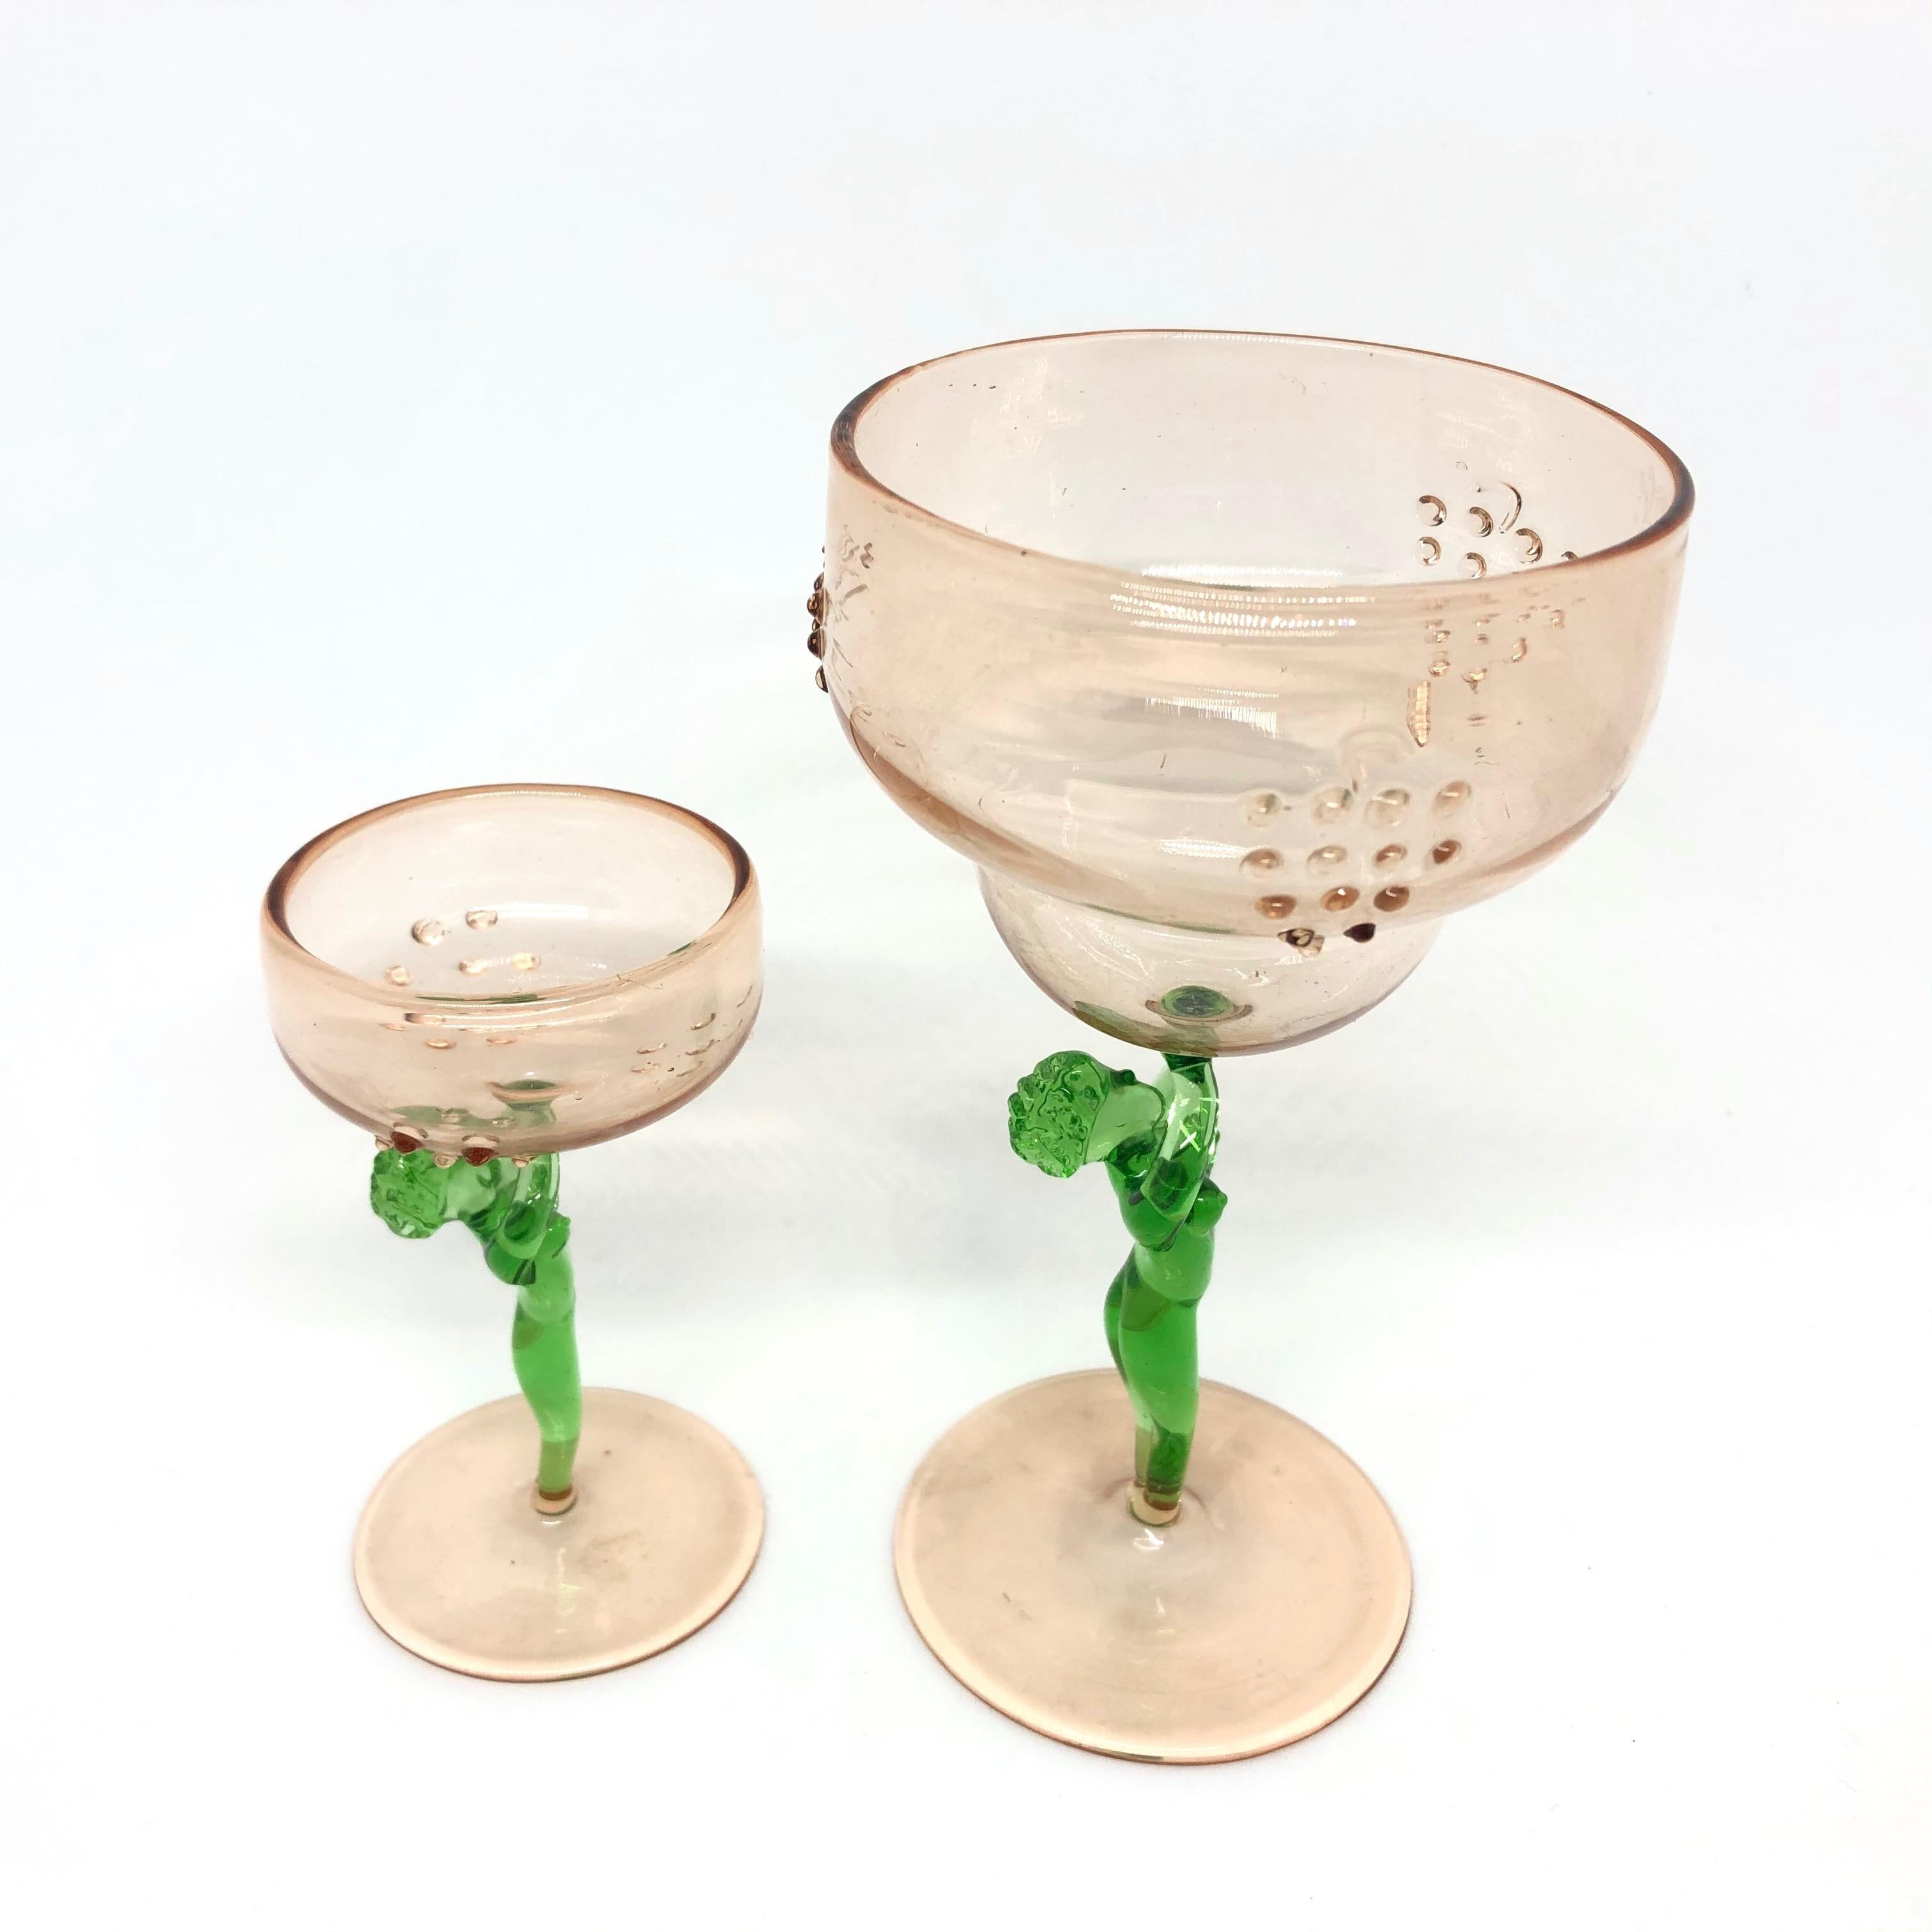 Set of two beautiful glasses with nude ladies as stems and a decanter made in the style of Bimini, Austria. Very good vintage condition, consistent with age and use. Small glass is approx. 3 3/8